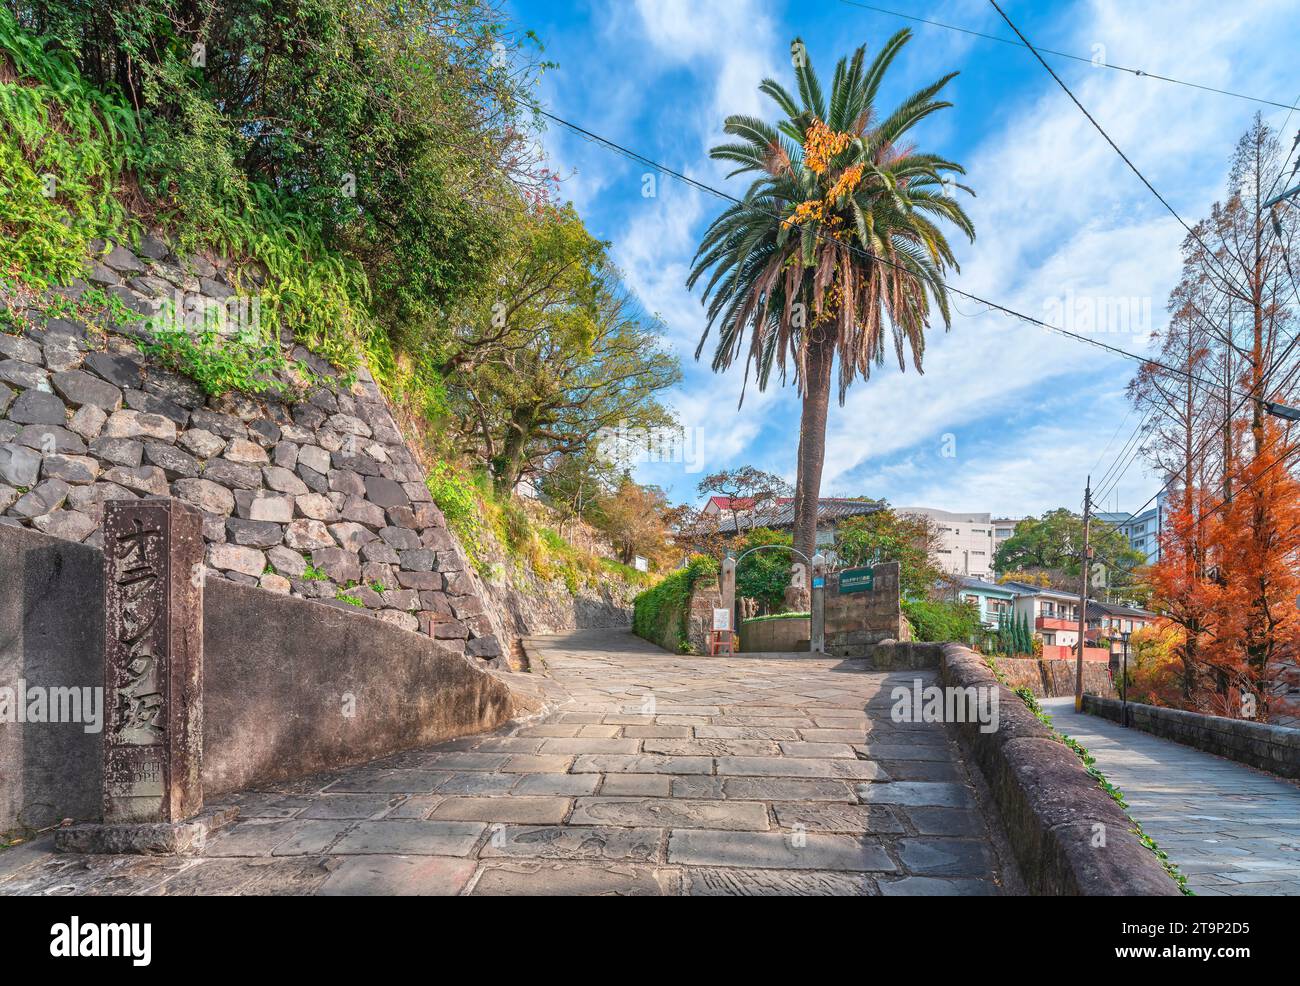 nagasaki, kyushu - dec 13 2022: Stone paved slope called Dutch Slope or Holland Zaka with a palm tree in the background leading to the private school Stock Photo